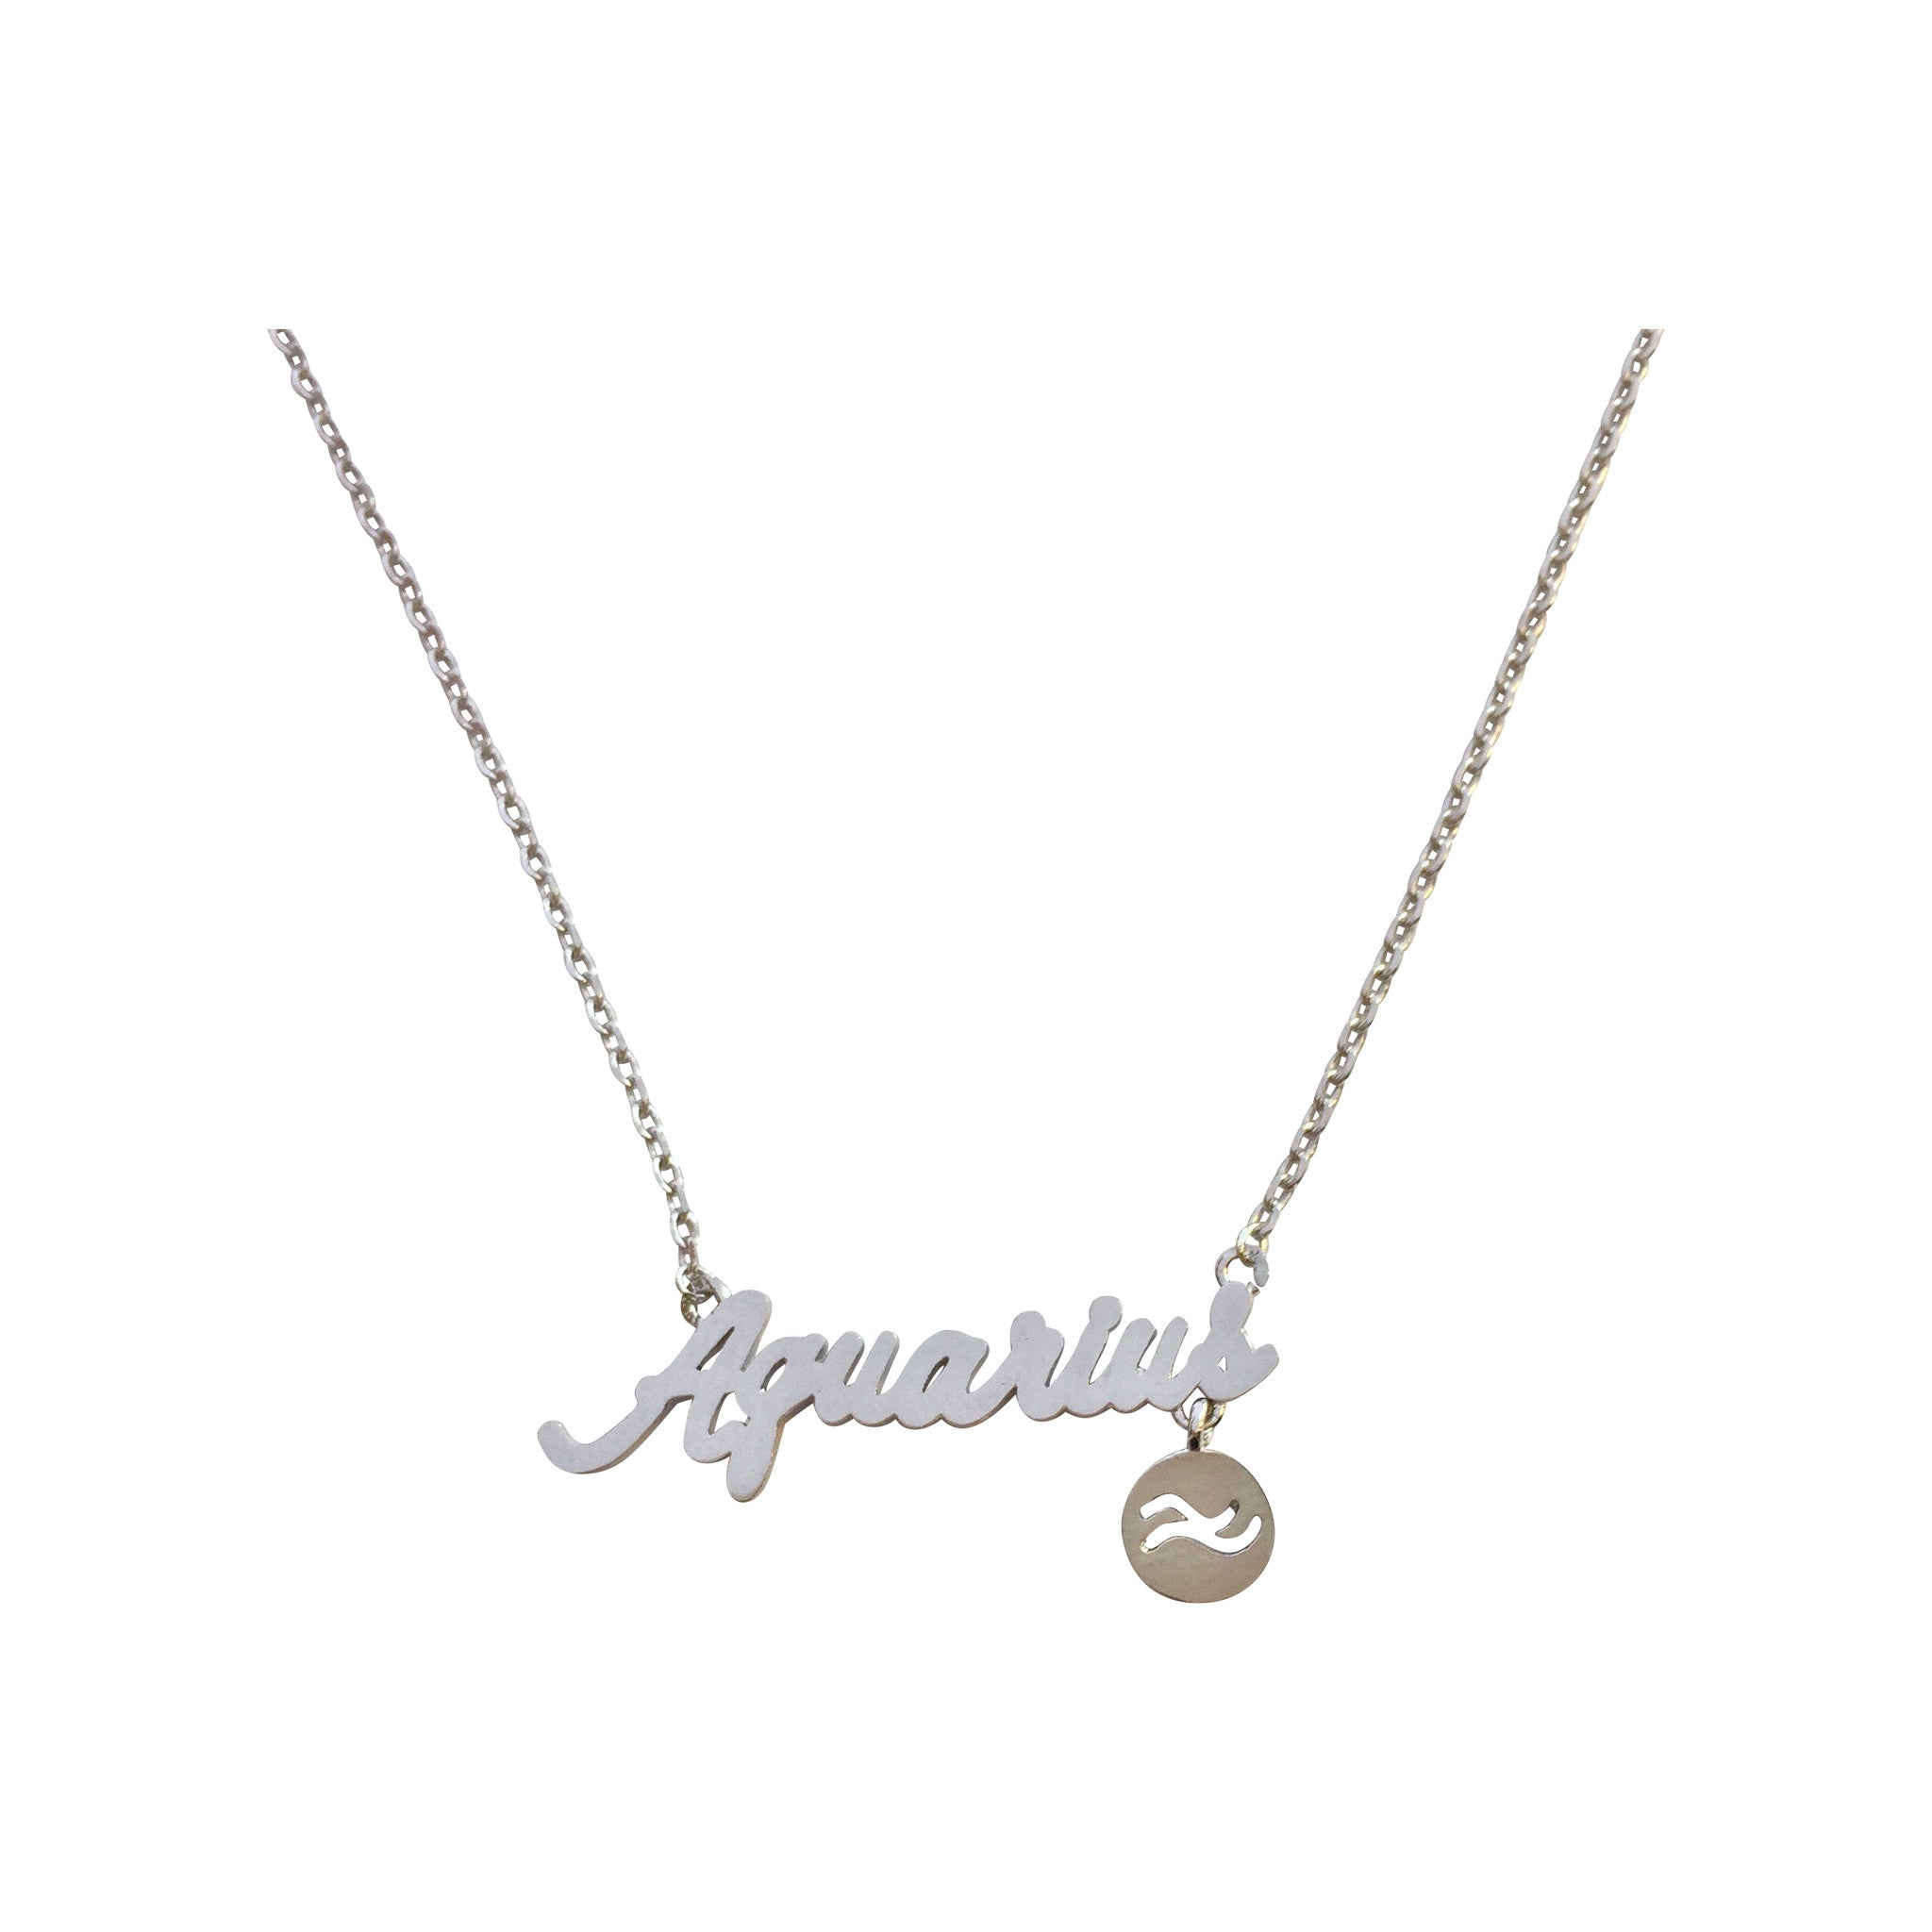 Aquarius Pendant Necklace - Sterling Silver / Pendant Only | Aquarius  pendant necklace, Aquarius pendant, Indie and harper